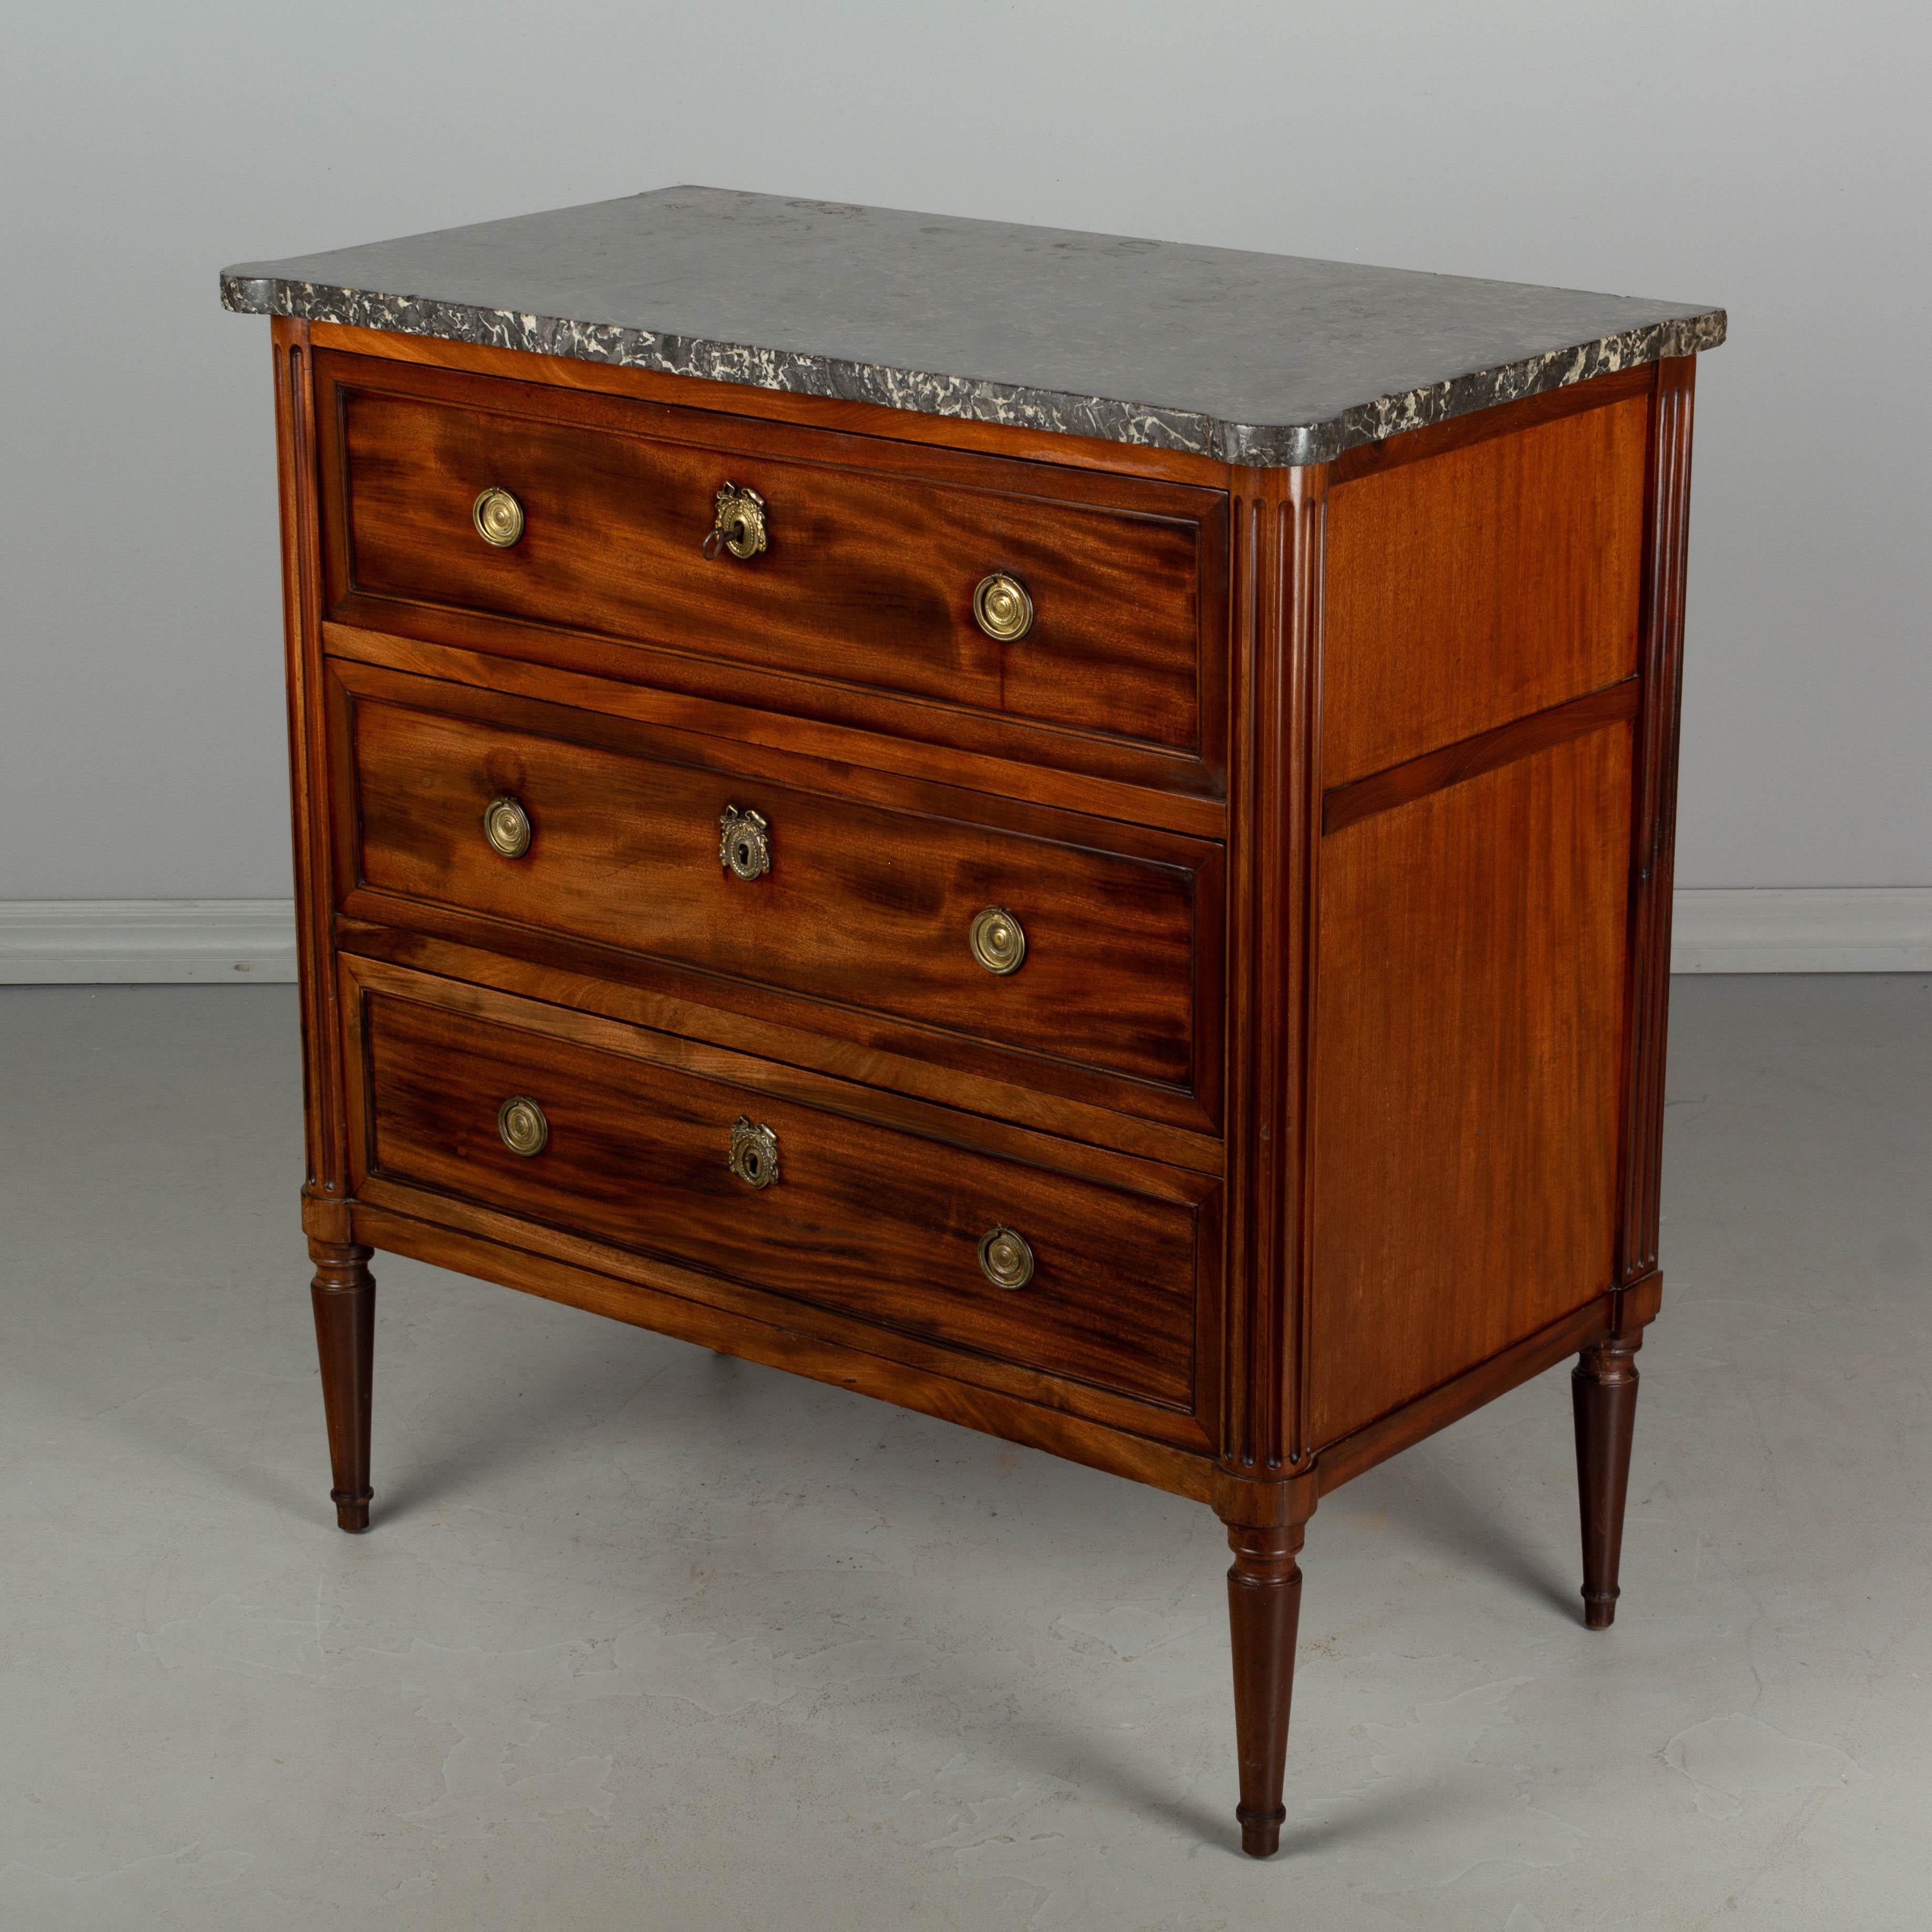 French 19th Century Louis XVI Style Secrétaire Desk Chest of Drawers